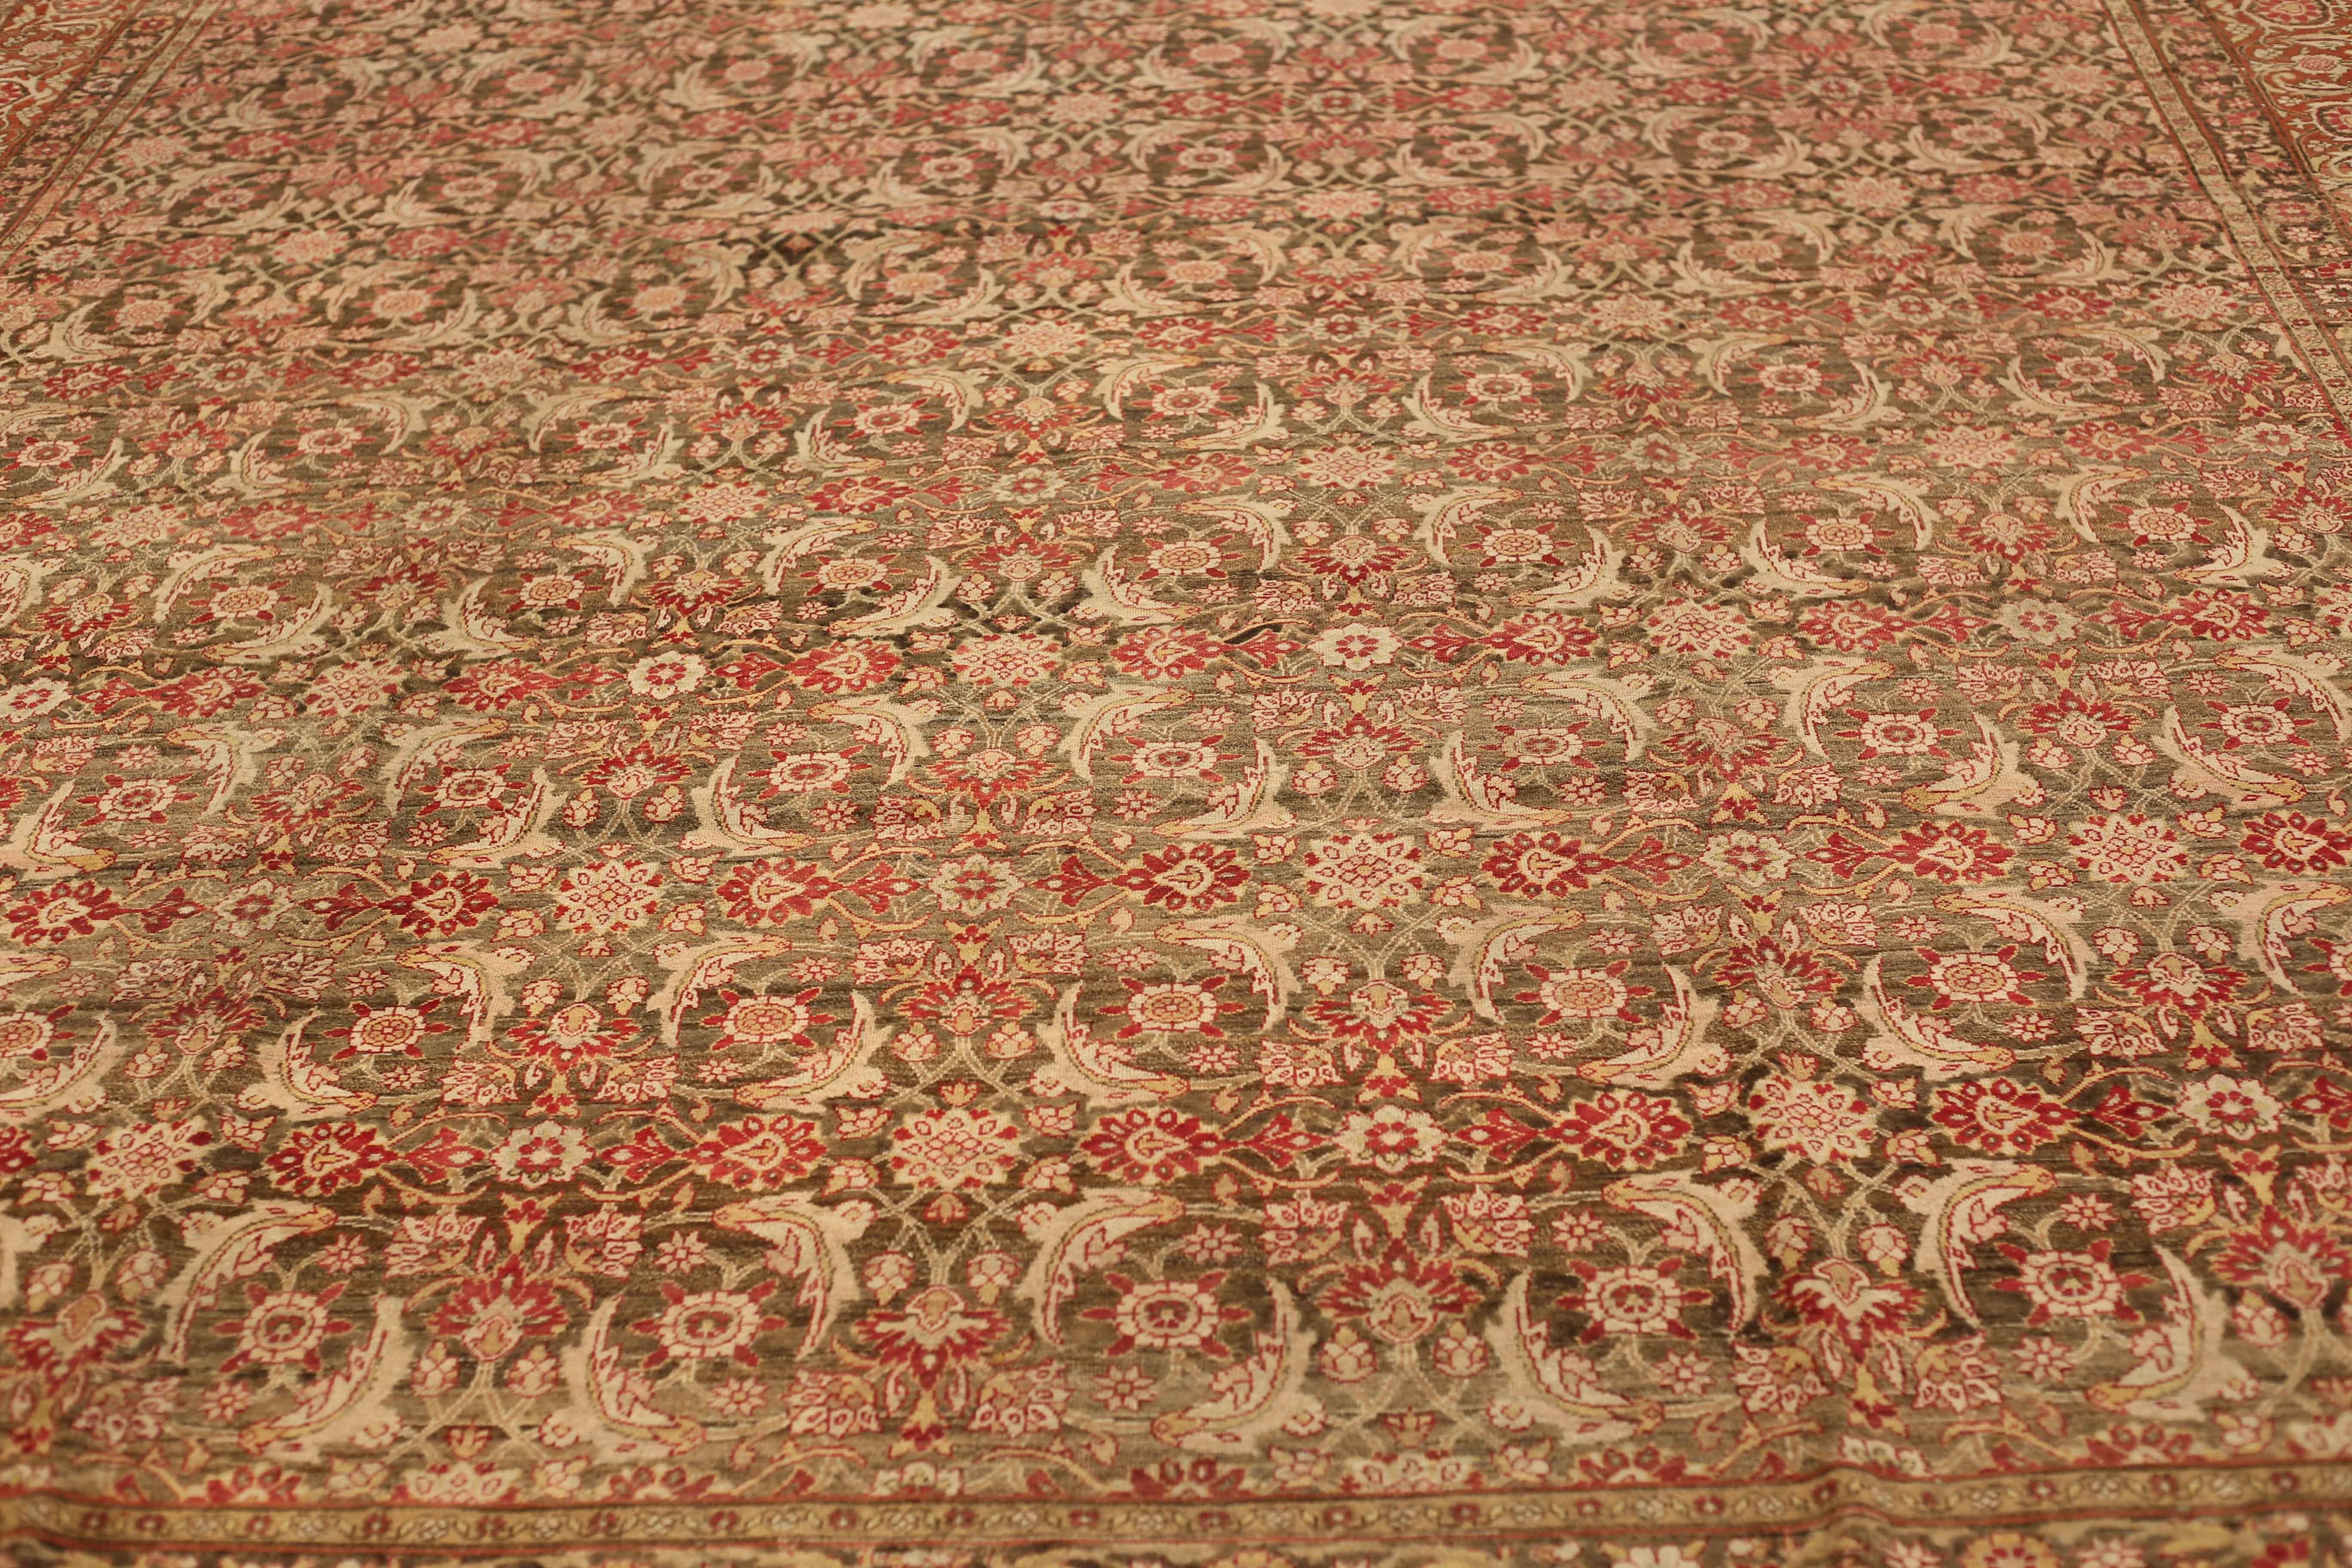 1910s-era antique handwoven wool Persian rug tinted with high quality organic dyes. It shows a stunning open field of medallions in red and pink over a beige mixed with brown backdrop. It’s ideal for spaces with contemporary, traditional, modern and